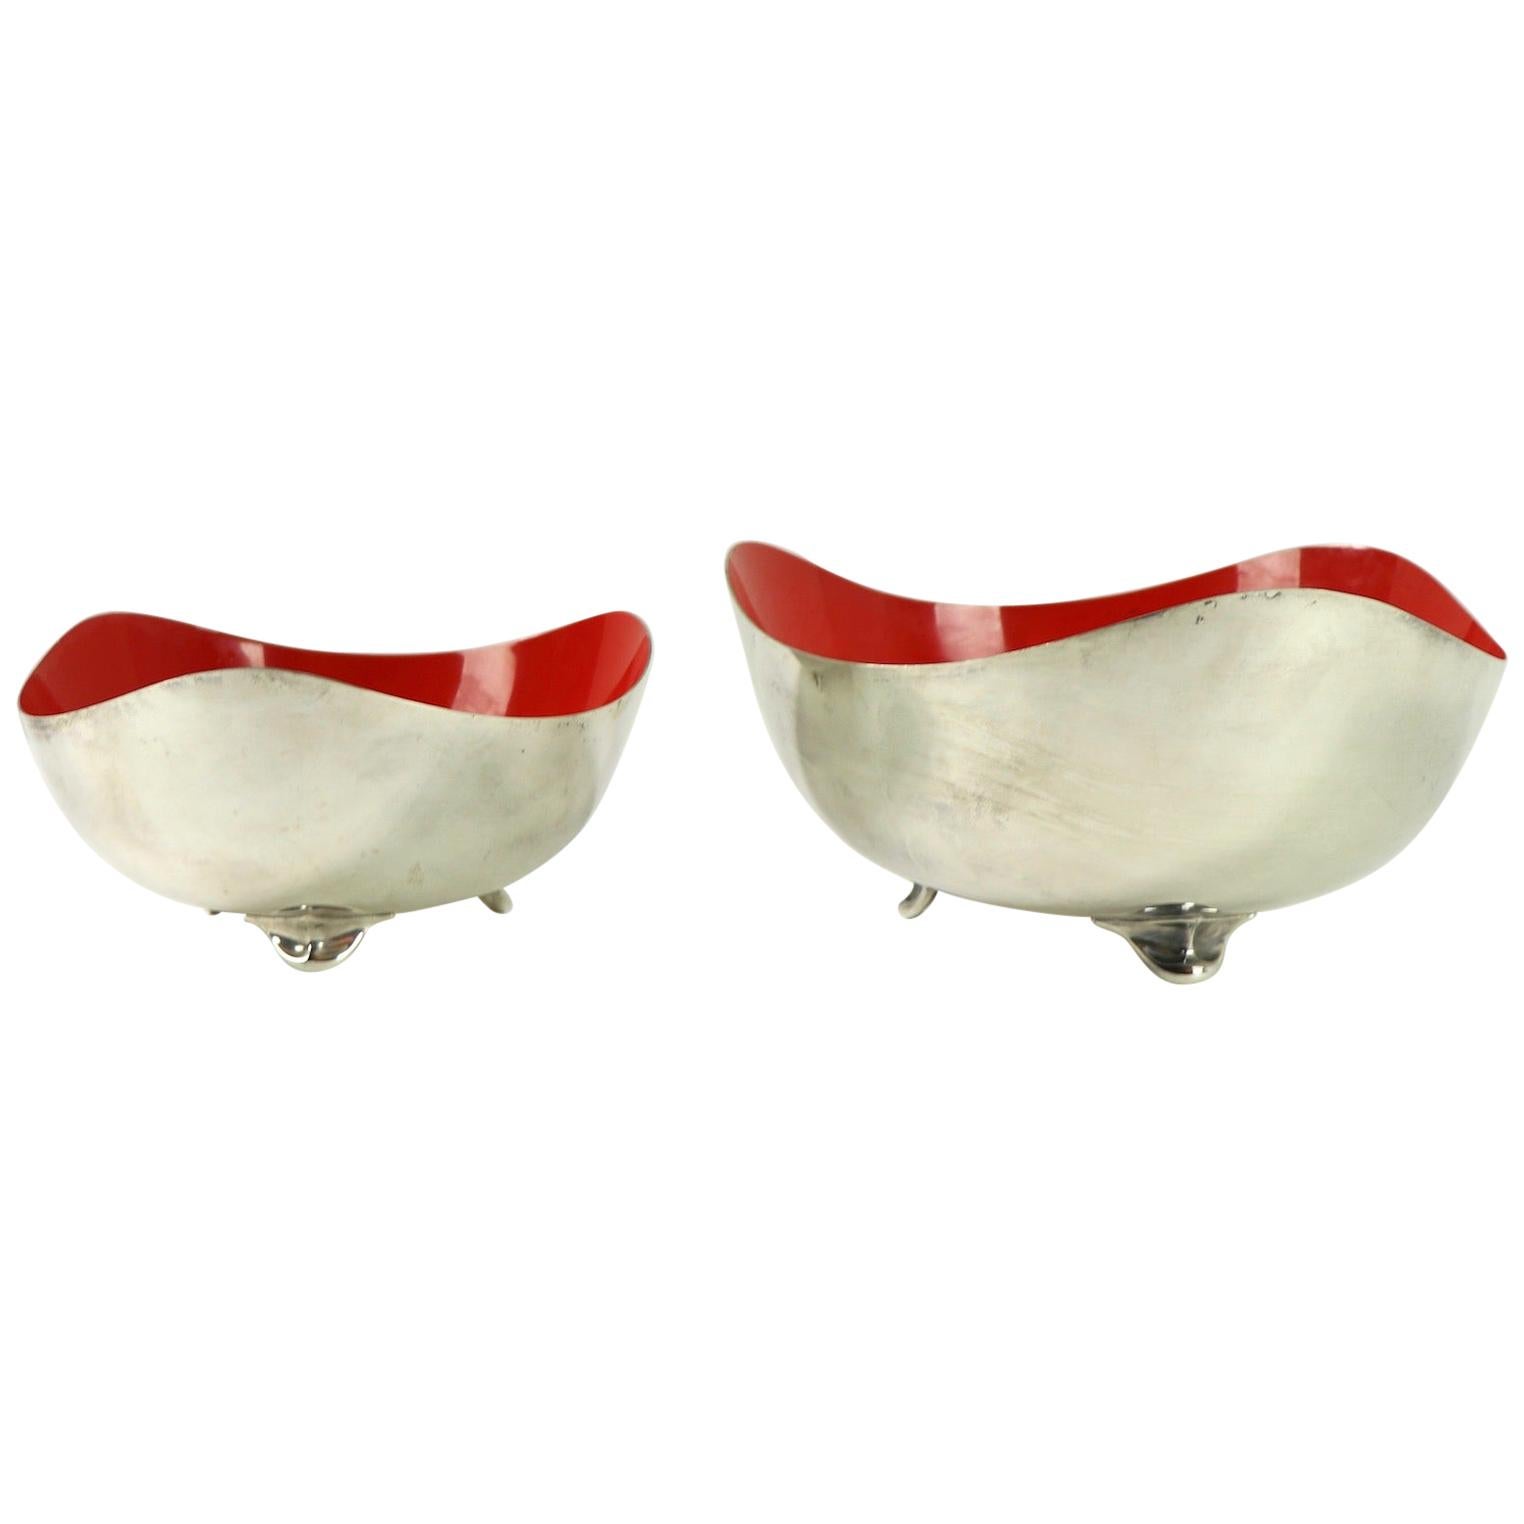 Two Mid Century Biomorphic Silver Plate Bowls with Red Enamel Interiors Oneida